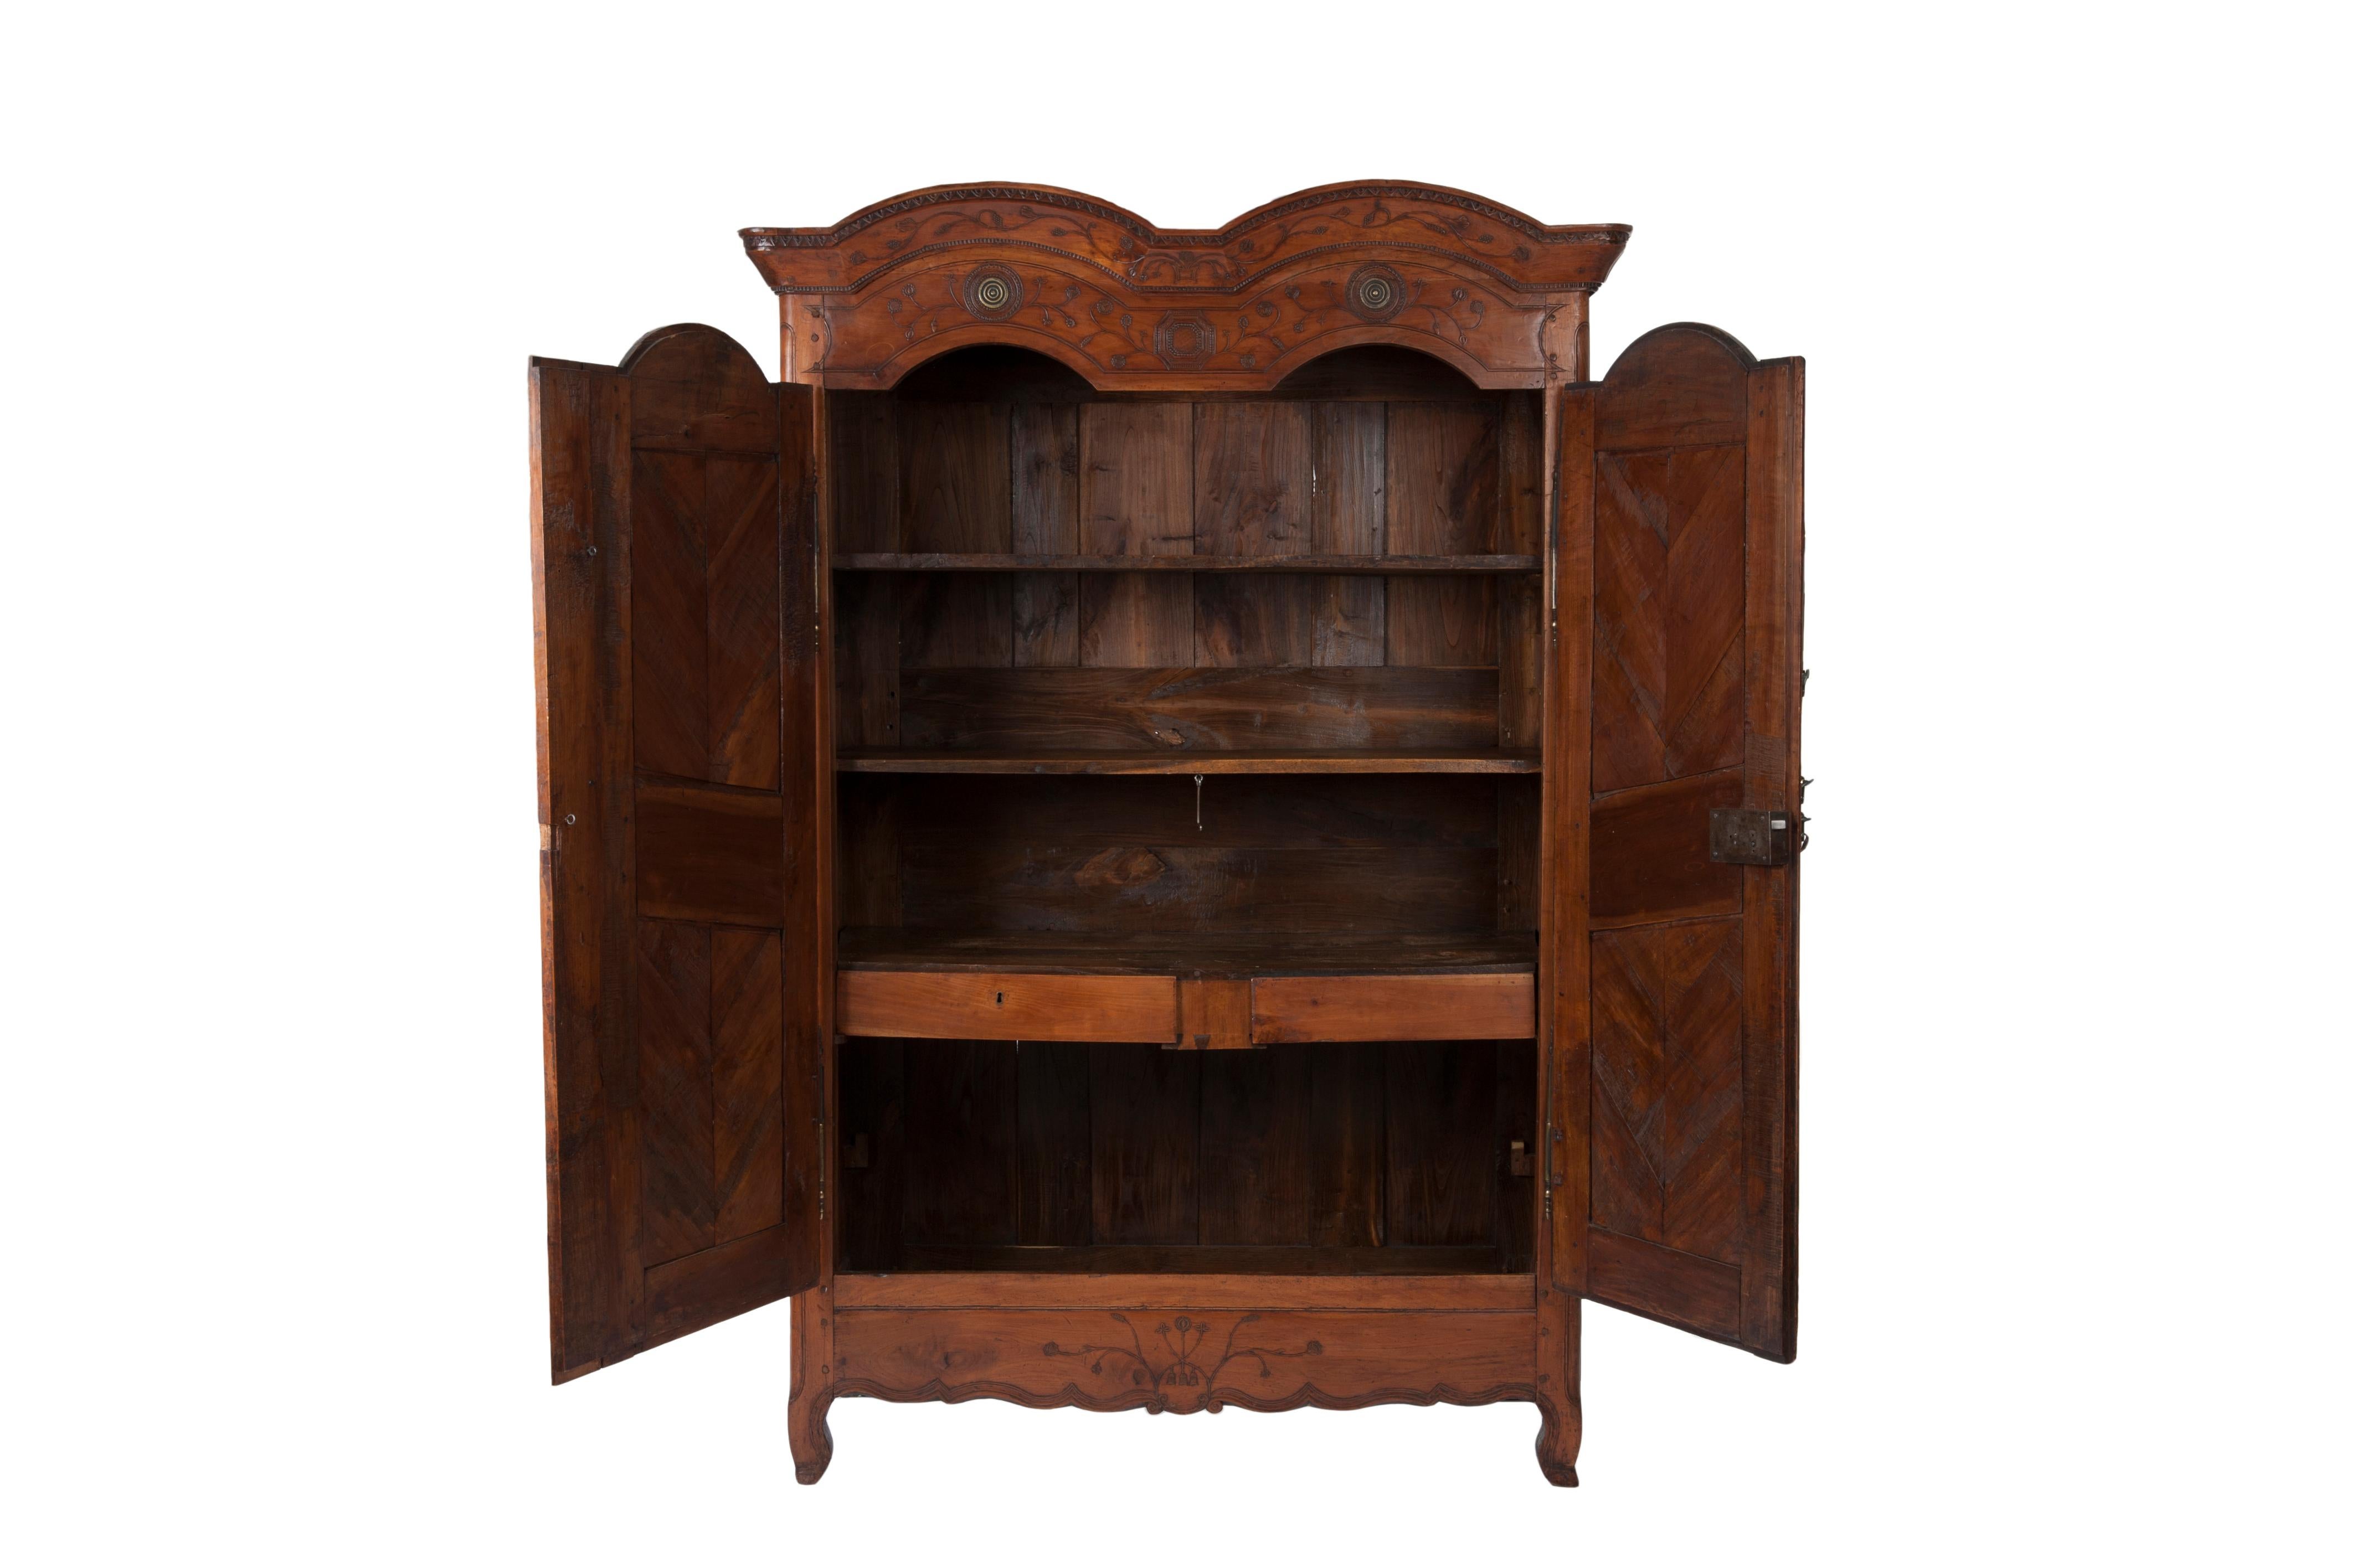 French Provincial French 18th Century Transition Cherrywood Armoire Cupboard, circa 1760 For Sale